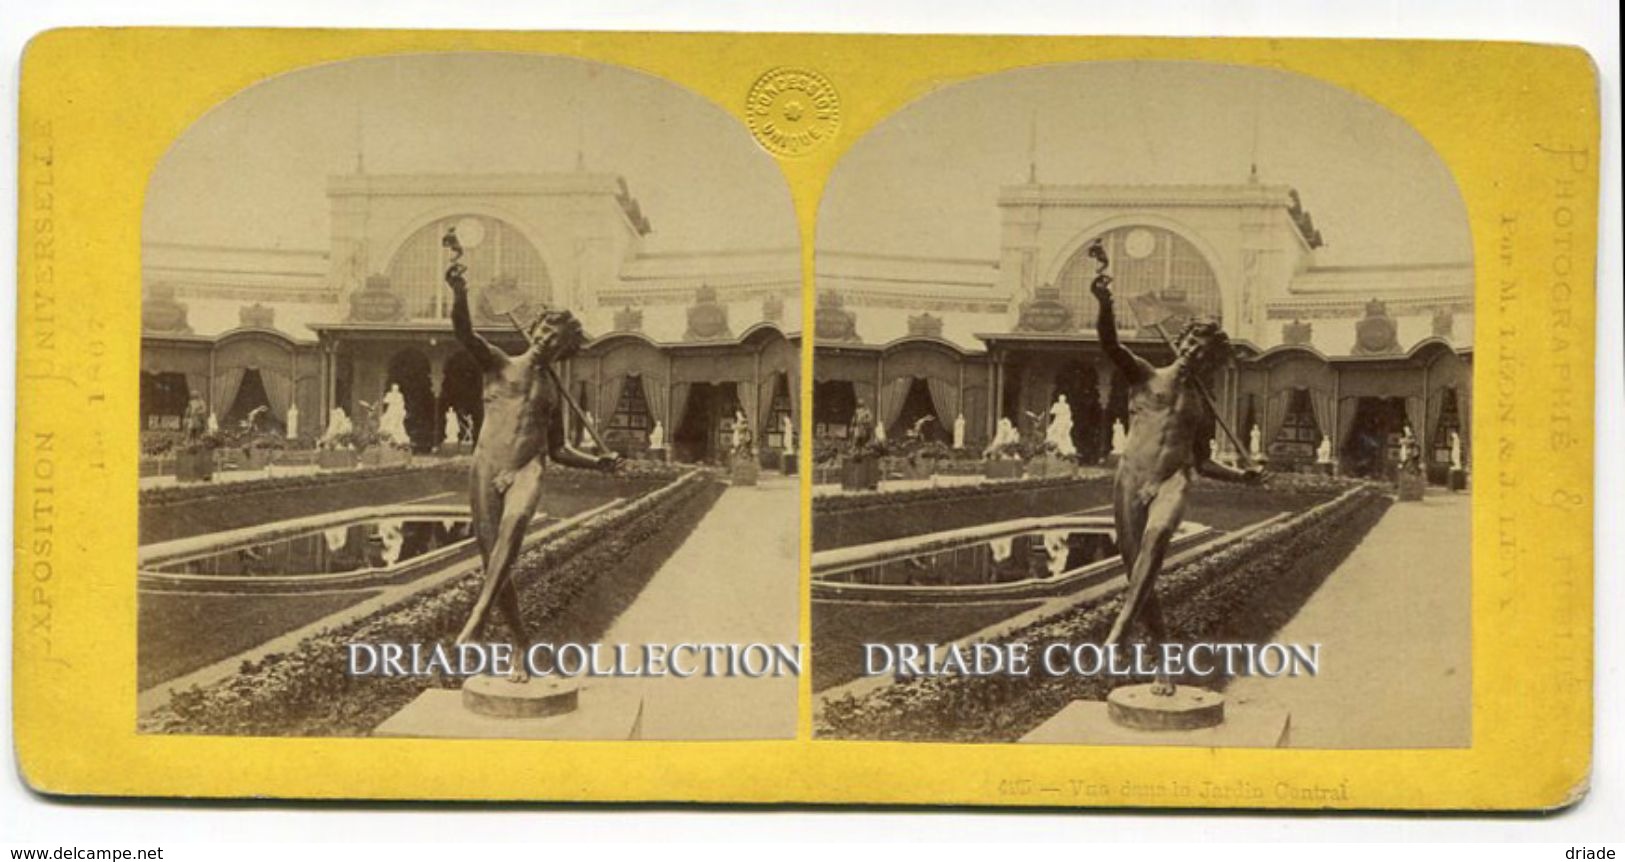 FOTO STEREOSCOPICA EXPOSITION UNIVERSELLE PARIS JARDIN CENTRAL ANNO 1867 - Stereoscopes - Side-by-side Viewers